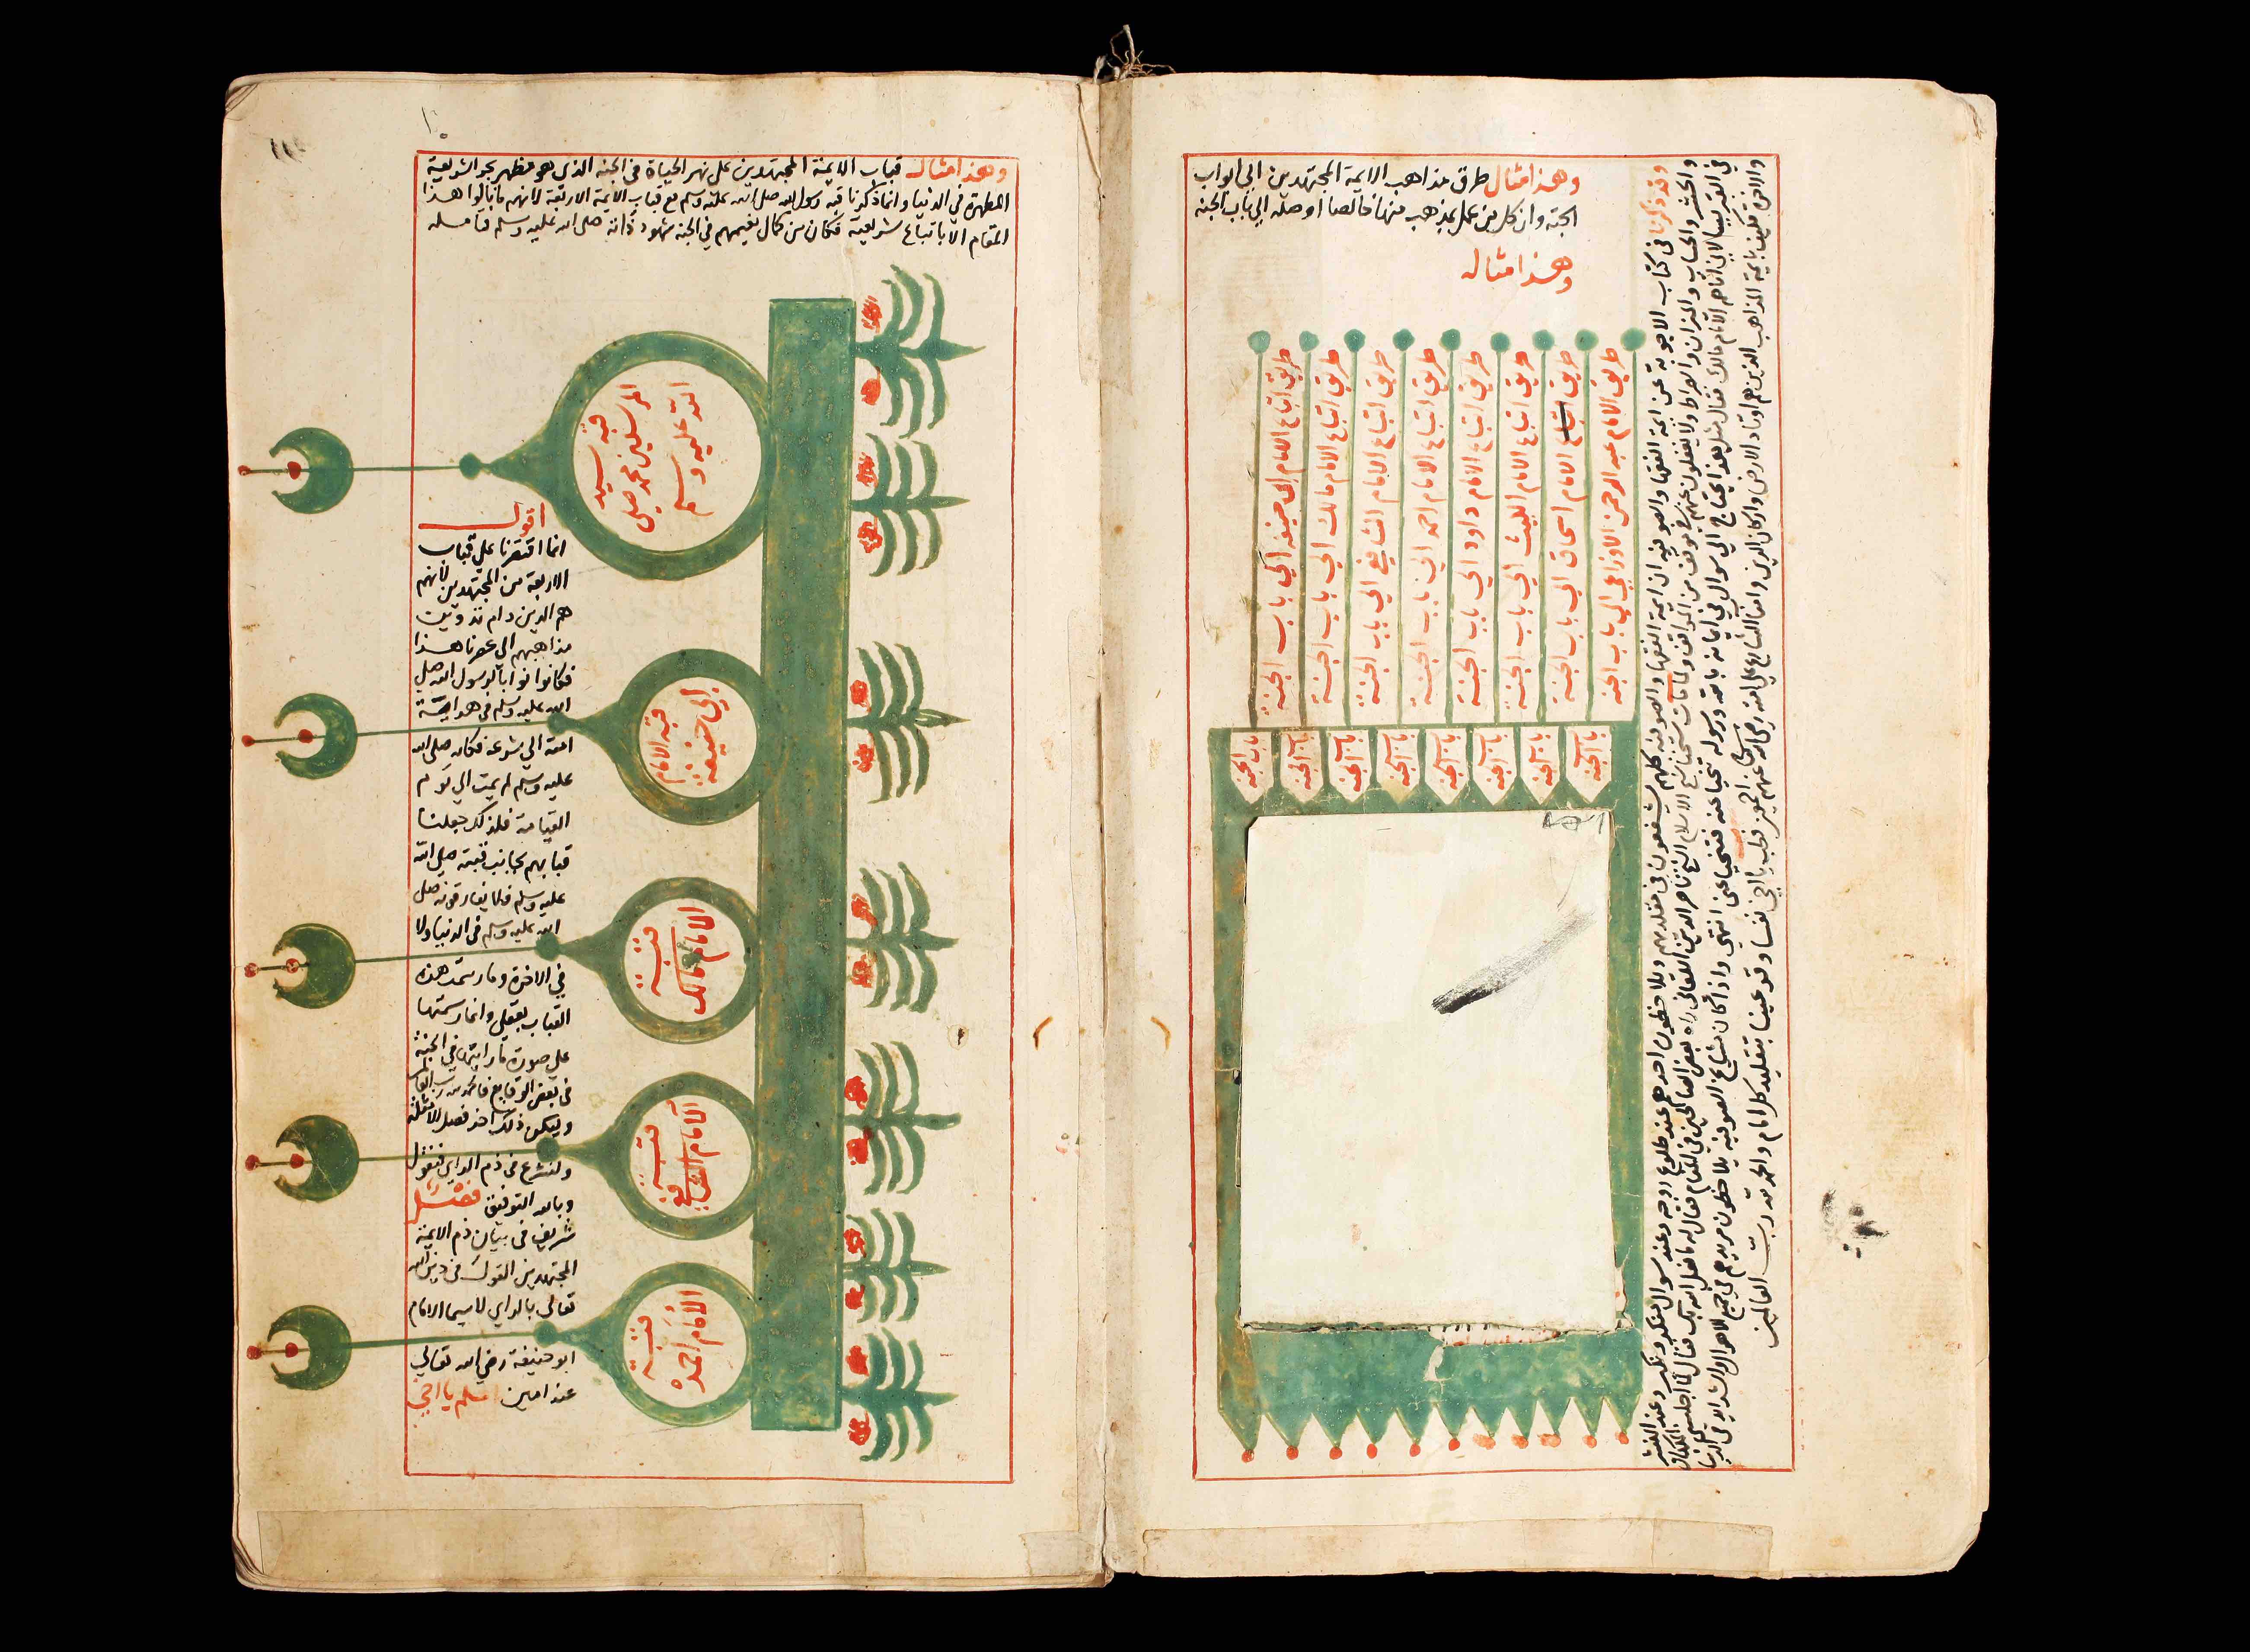 Legal text (17th-c.?) from Āl Budeiry Library (<a href='https://w3id.org/vhmml/readingRoom/view/133402'>ABLJ 310</a>)